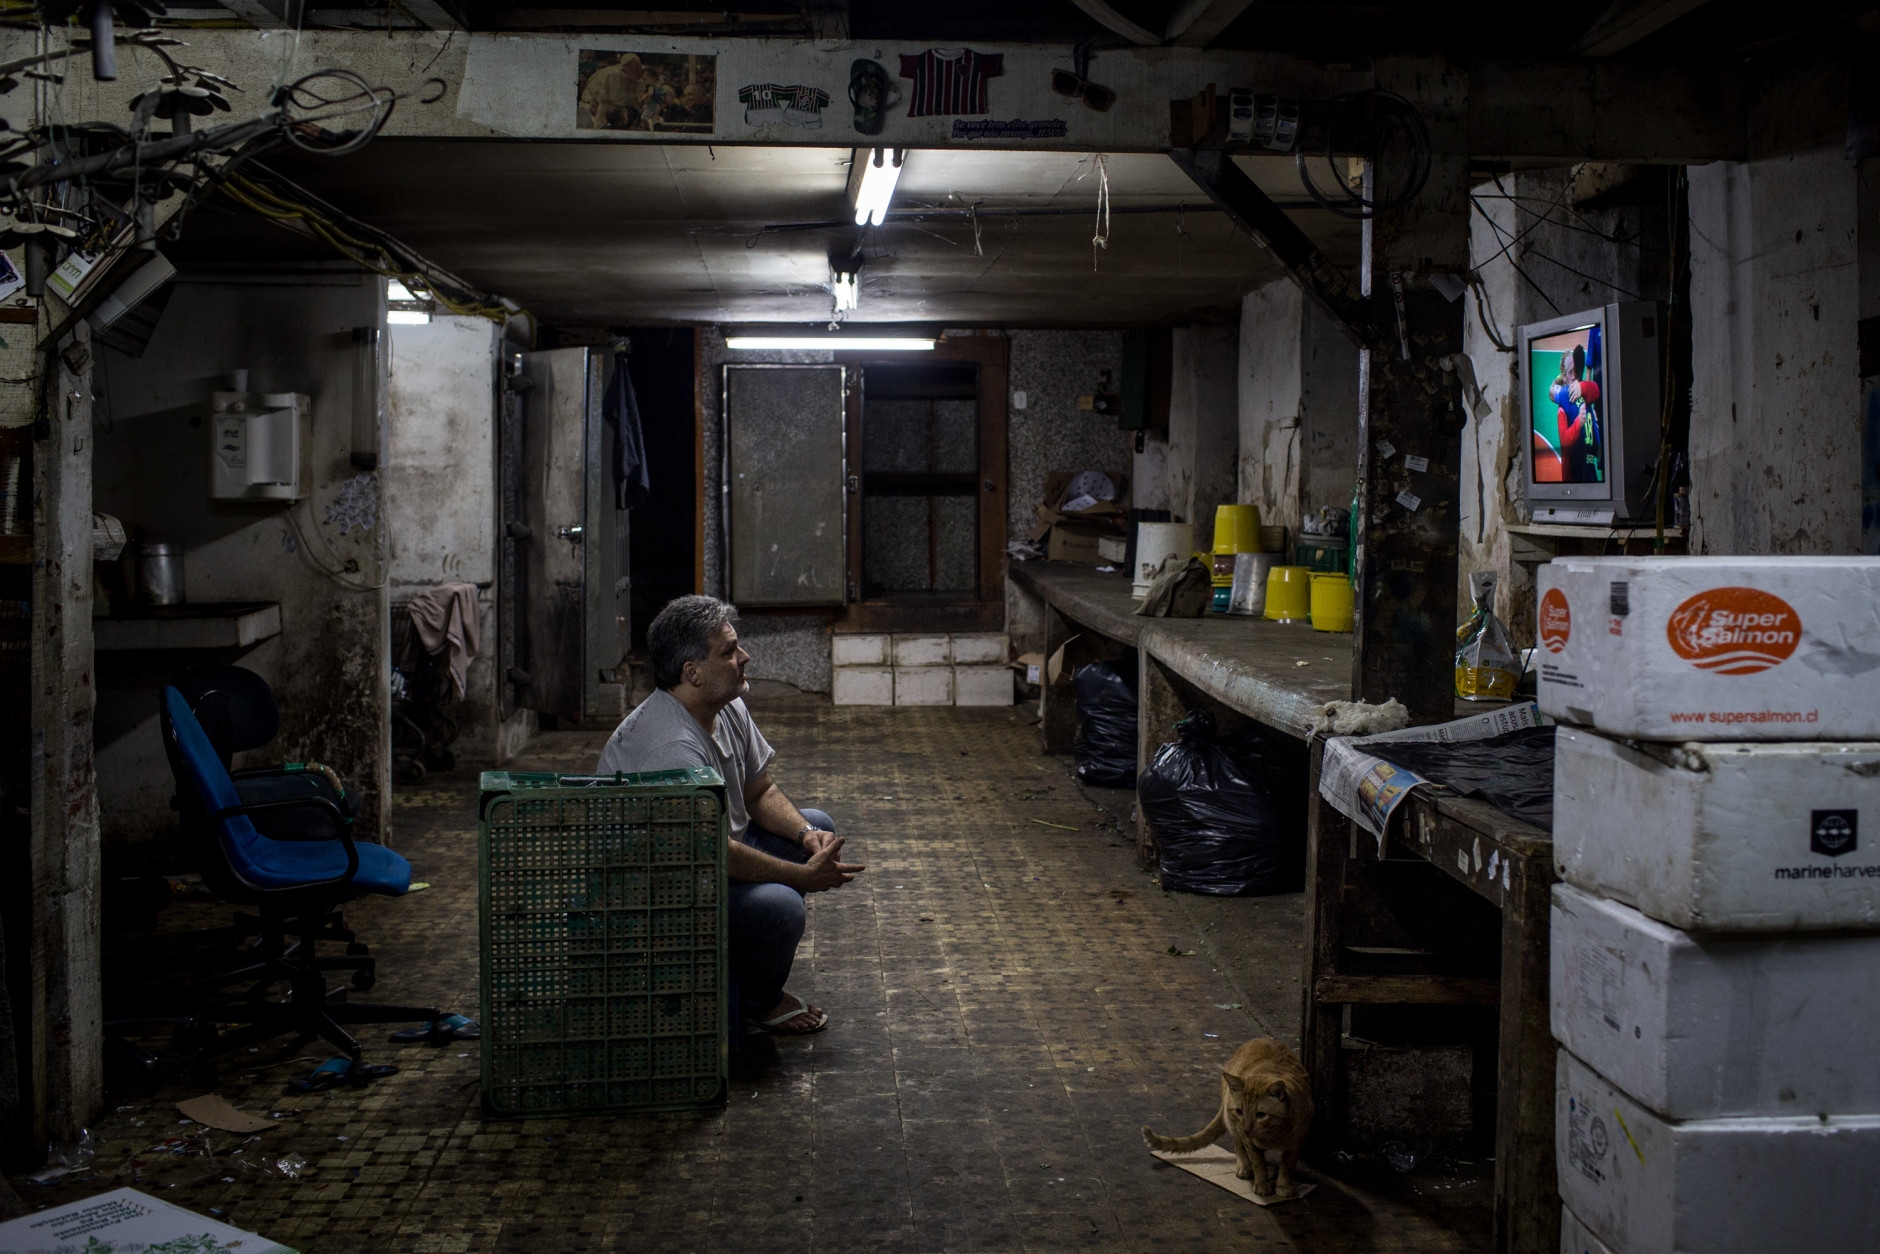 RIO DE JANEIRO, BRAZIL - AUGUST 15:  A man watches the Olympic games on his tv in the basement of a shop on August 15, 2016 in Rio de Janeiro, Brazil. Brazil is currently hosting the 2016 Summer Olympic games despite the dismissal of President Dilma Rousseff, pollution concerns, ongoing crime problems and a failing economy. Around 1.4 million residents, or approximately 22 percent of Rio's population, reside in favelas which often lack proper sanitation, health care, education and security, for many of these residents watching the Olympic games on tv is their only access to the event.  (Photo by Chris McGrath/Getty Images)